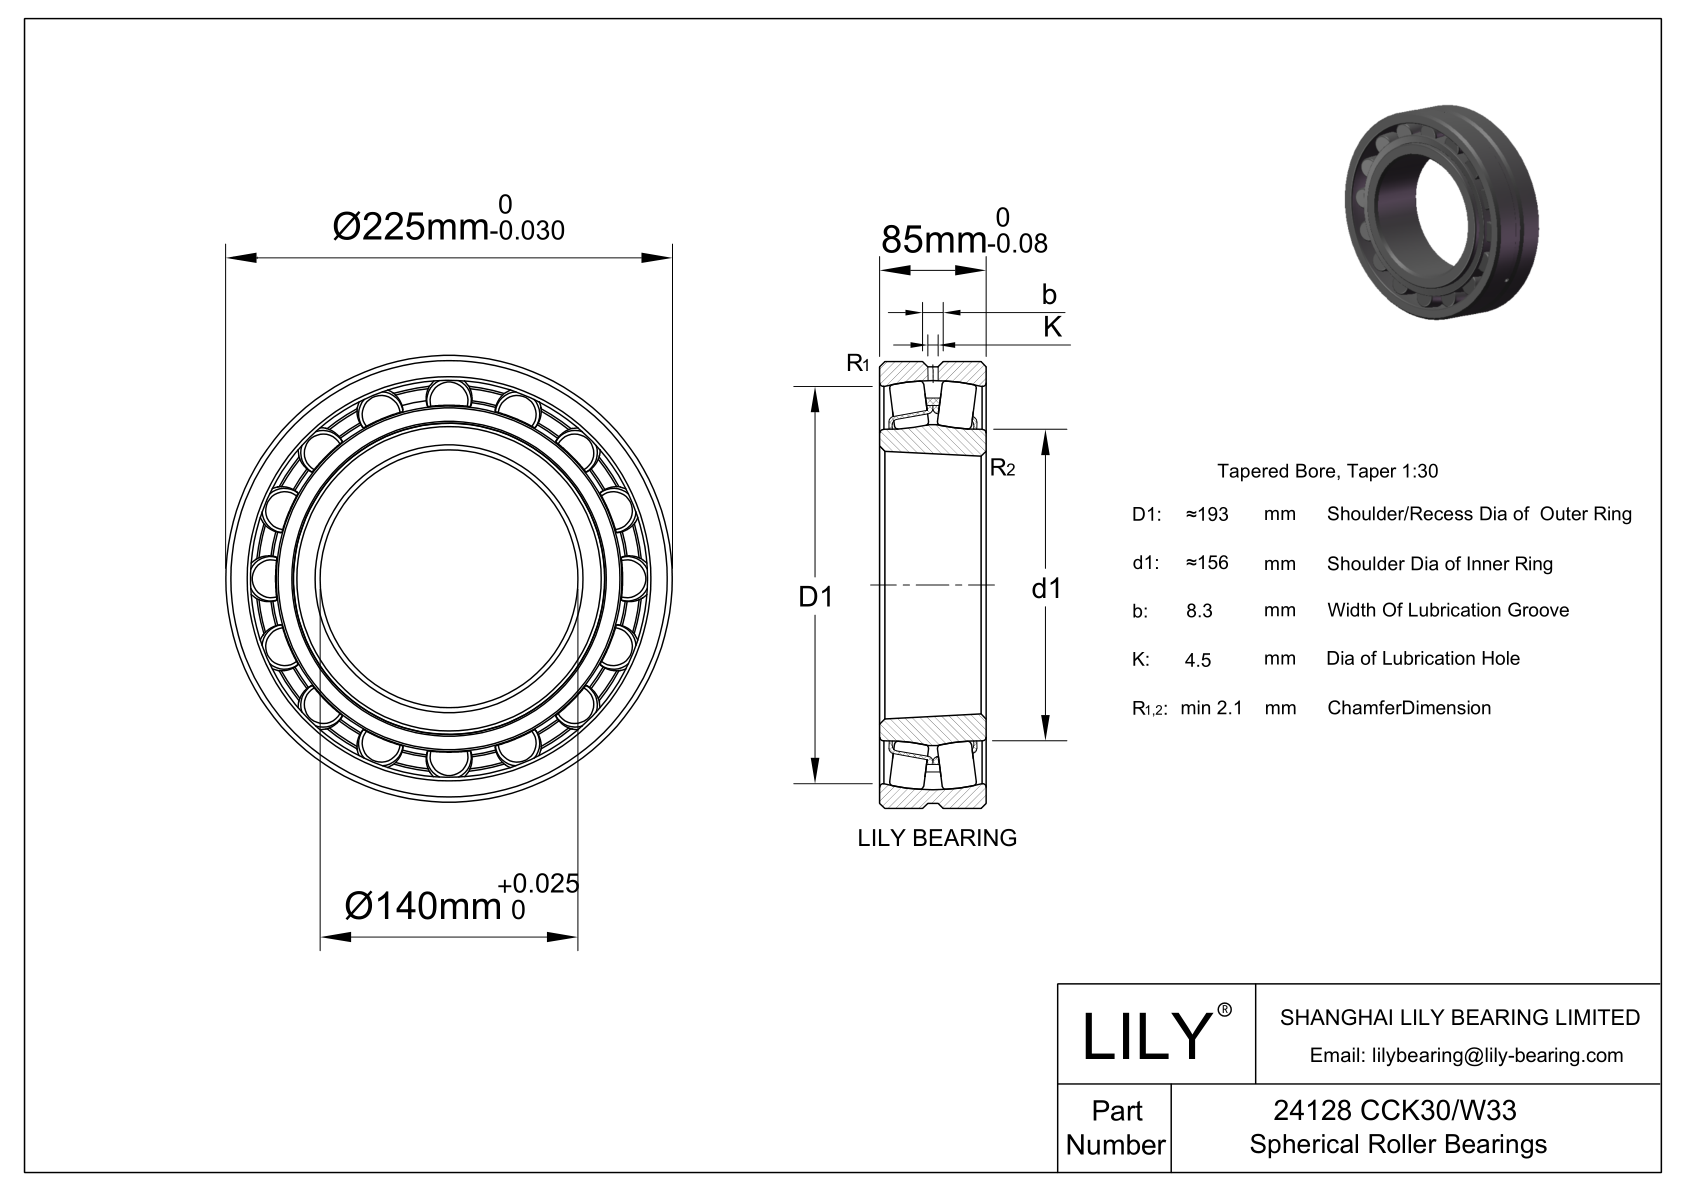 24128 CCK30/W33 Double Row Spherical Roller Bearing cad drawing